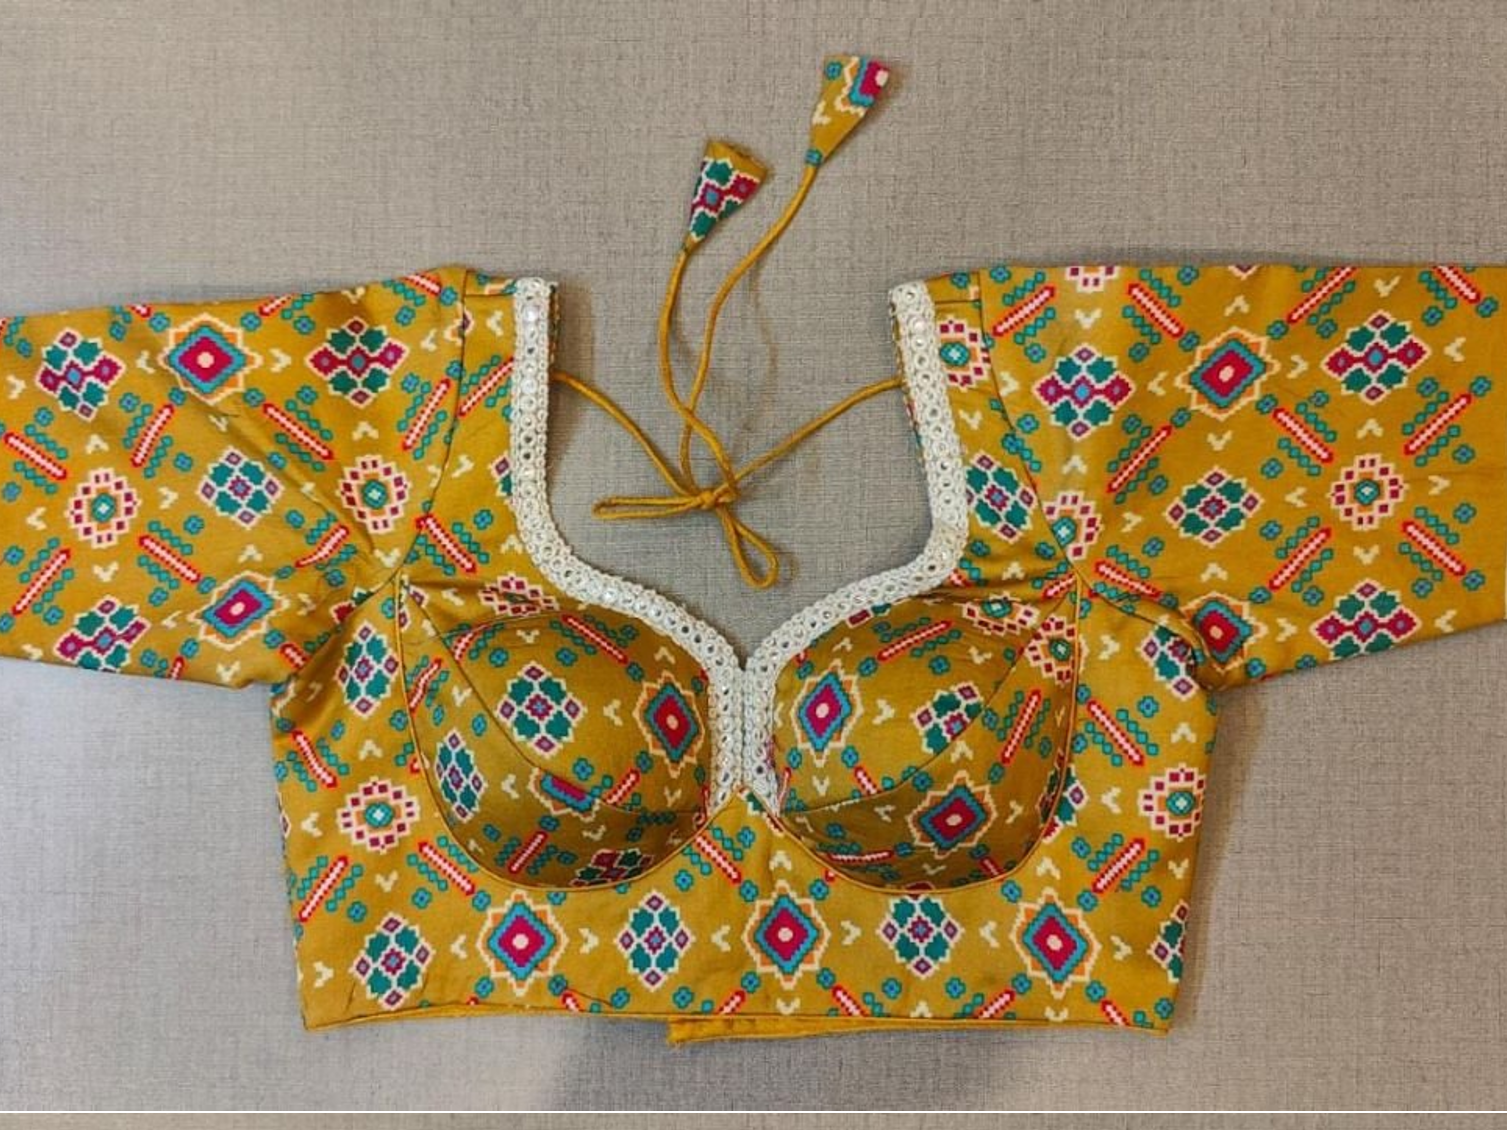 Buy women's yellow Ajrakh Block Printed, padded Saree Blouse that has a round neck, Hook & tie-up closure at back with 3/4th sleeves. Classic is never old and enough to have in your closet!! Pair this fashionable blouse with a beautifully printed sari and statement neckpiece and you are good to go! Buy this designer blouse in the USA from Pure Elegance.- Front View